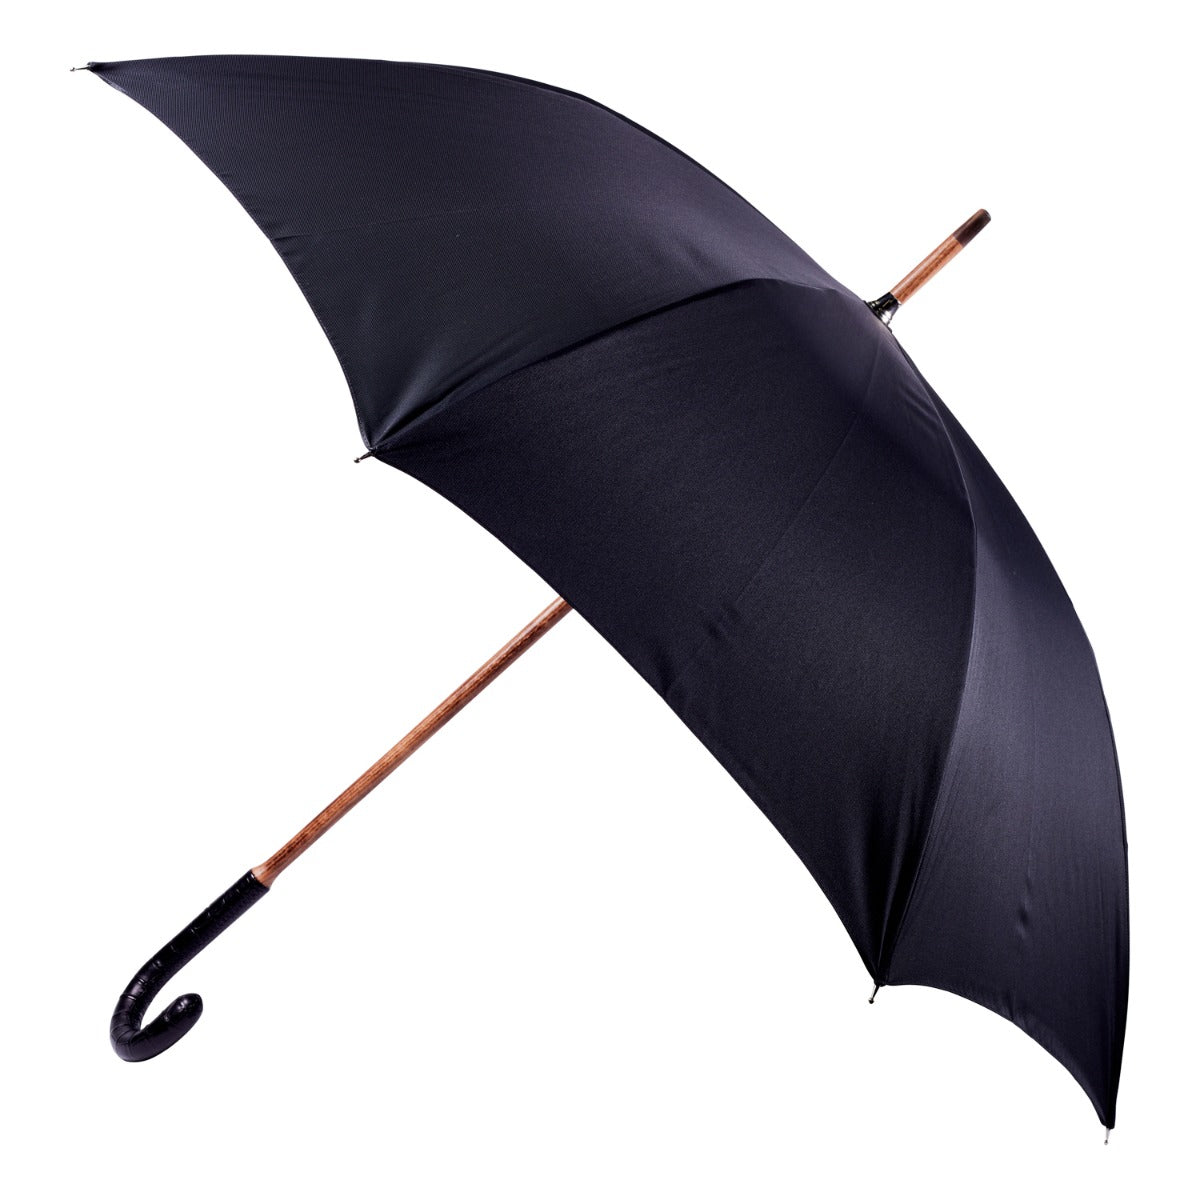 A Black Alligator Solid Stick with Black Canopy umbrella with wooden handle on a white background, by KirbyAllison.com.